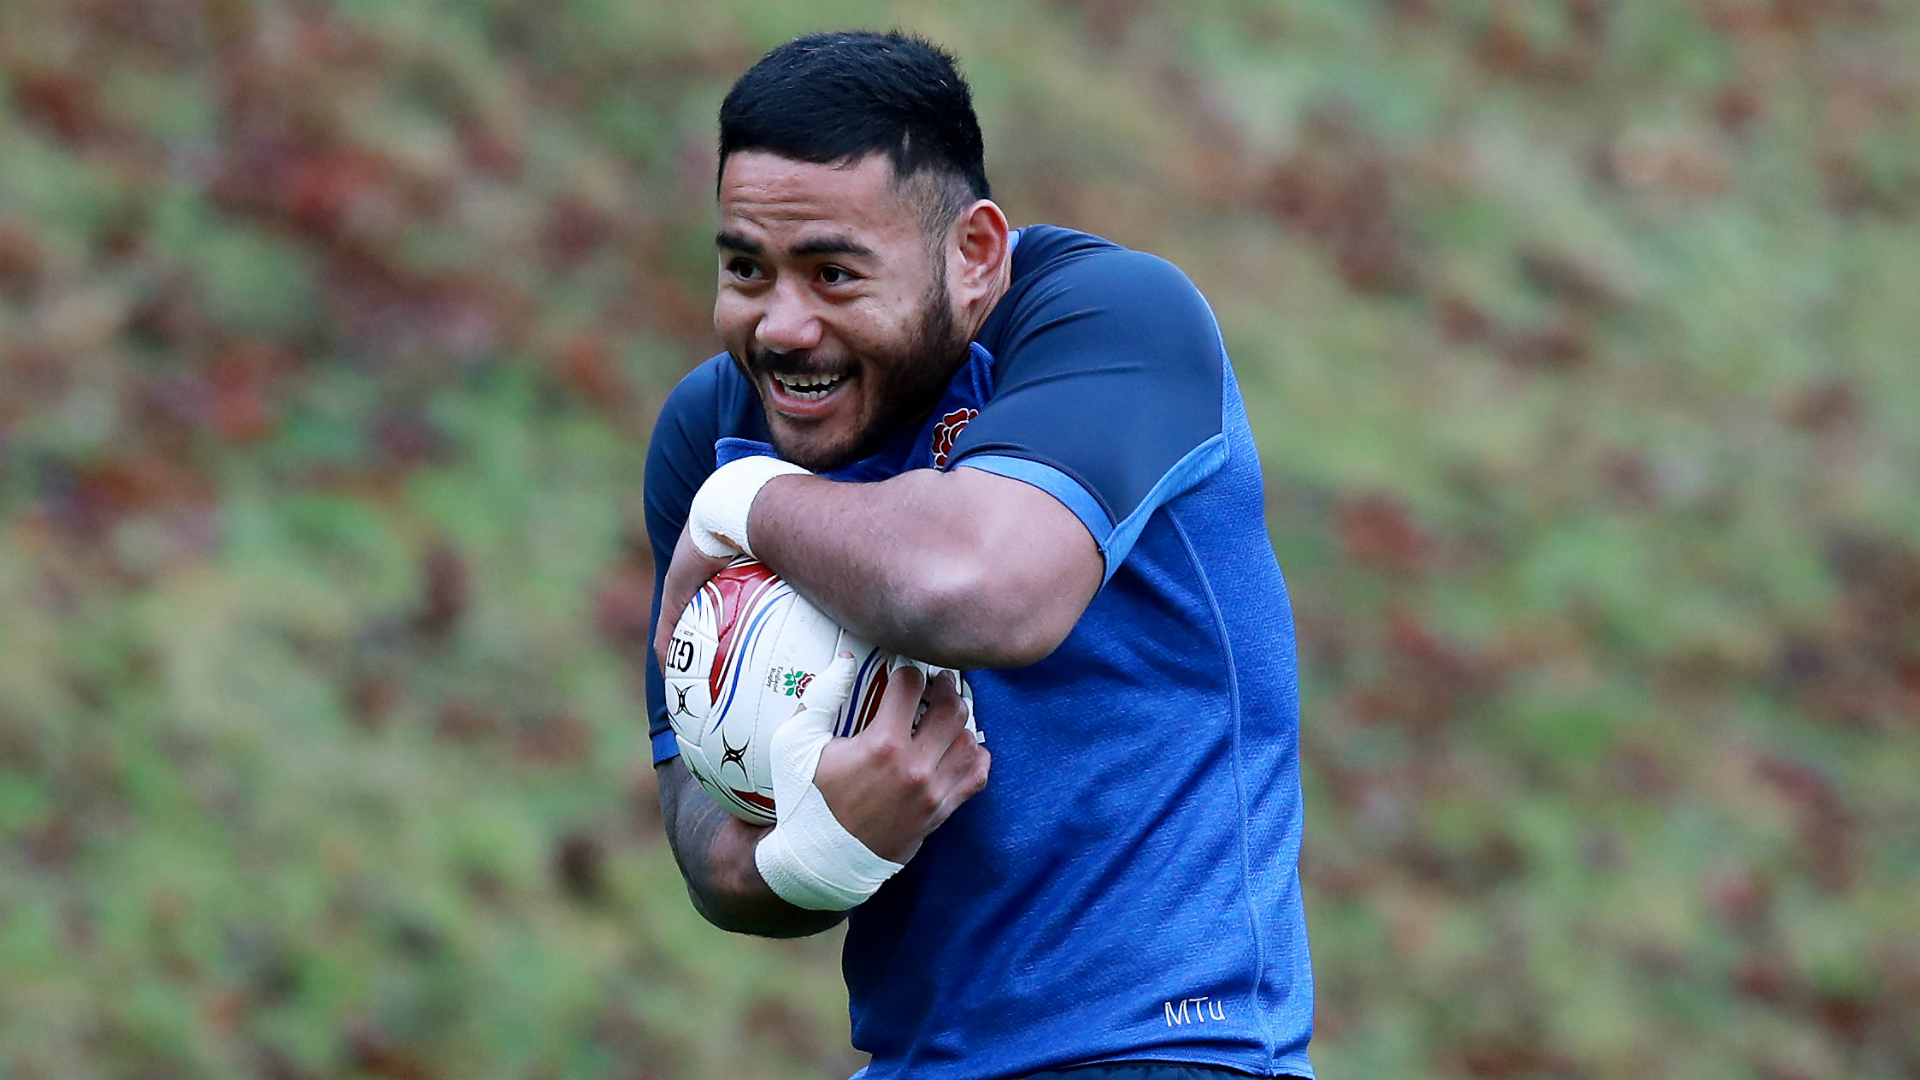 Manu Tuilagi has joined Sale Sharks for the 2020-21 season, so he will still be available for England selection.